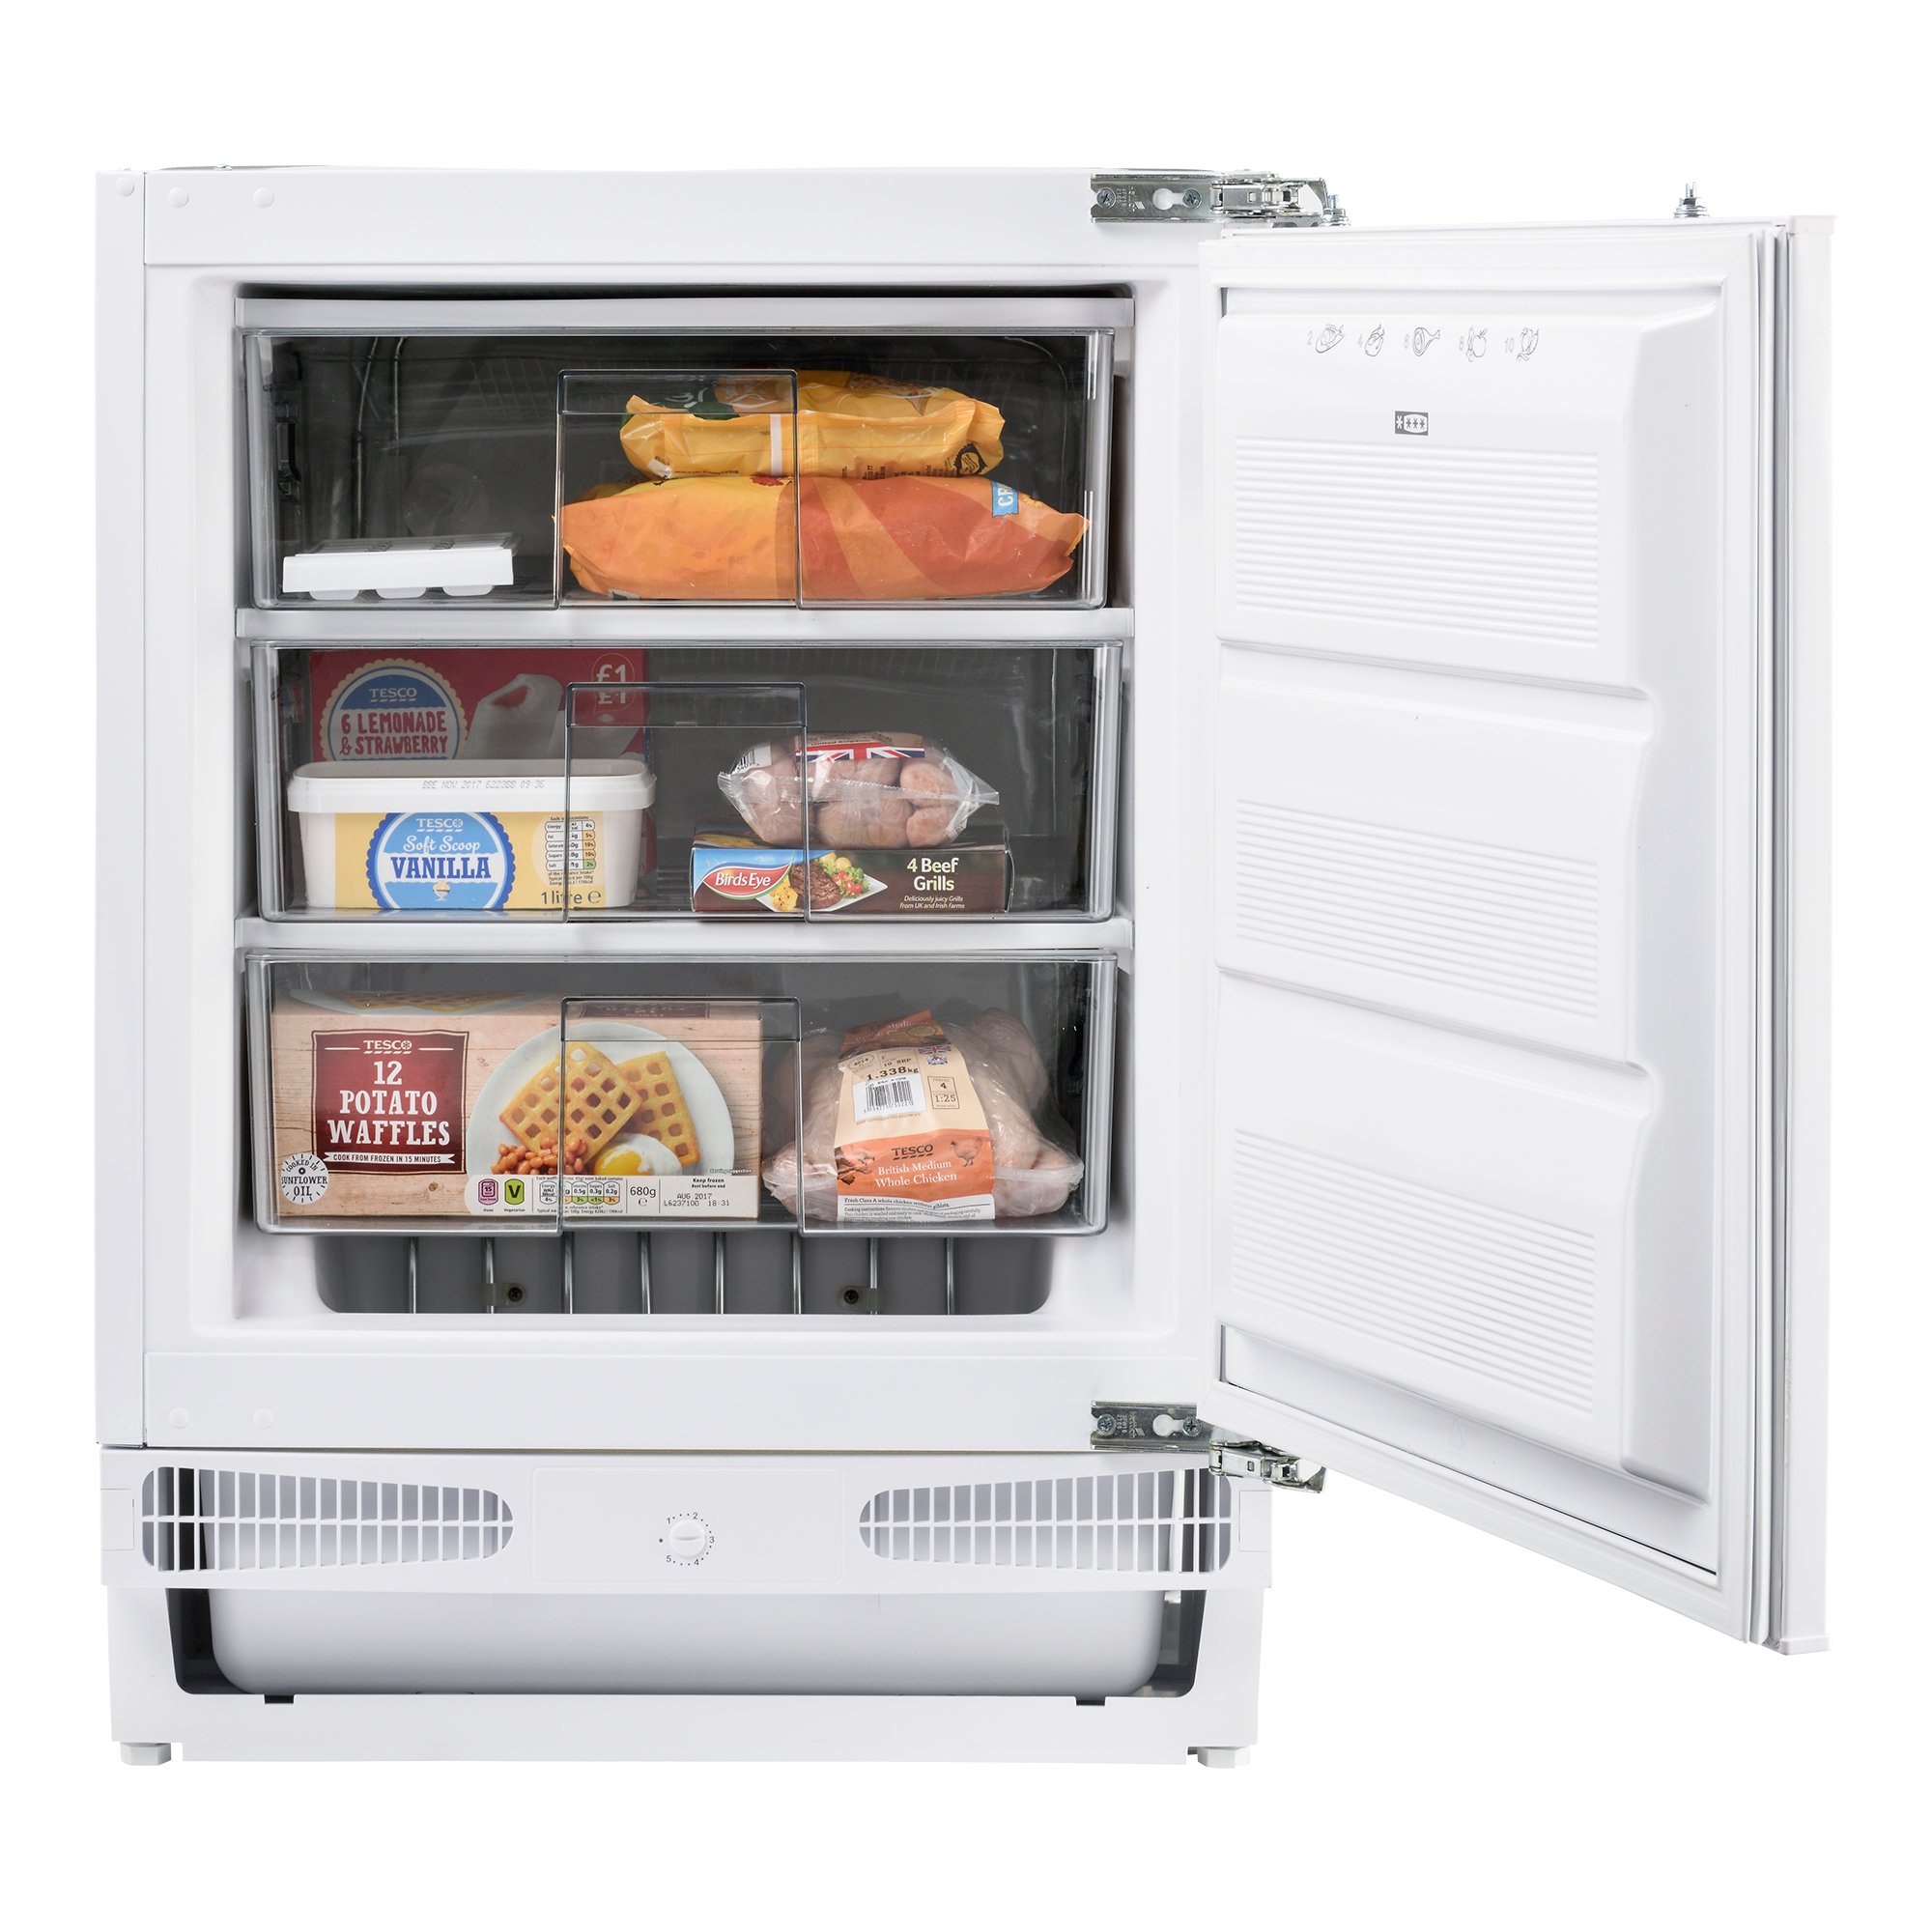 With a total capacity of 107 litres, this freezer is perfect for a couple or small family to store all their frozen food. Designed to be built under your countertop and with a reversible door, it suits any kitchen layout. Features include 3 storage drawers.